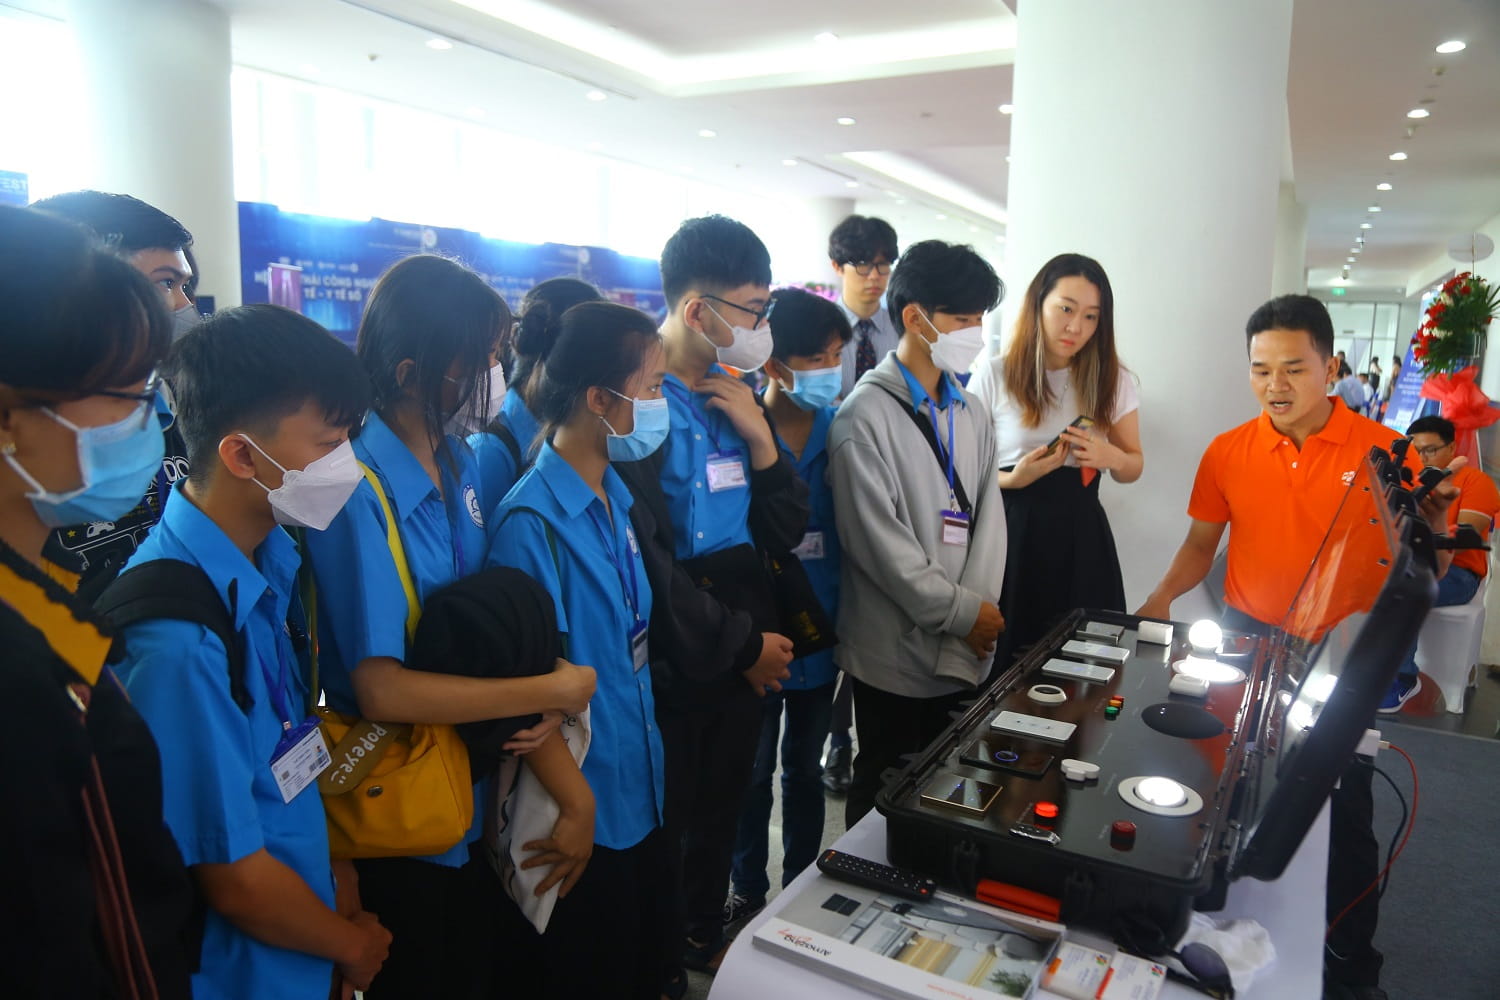 Guests experienced FPT products at Techfest Vietnam 2022.